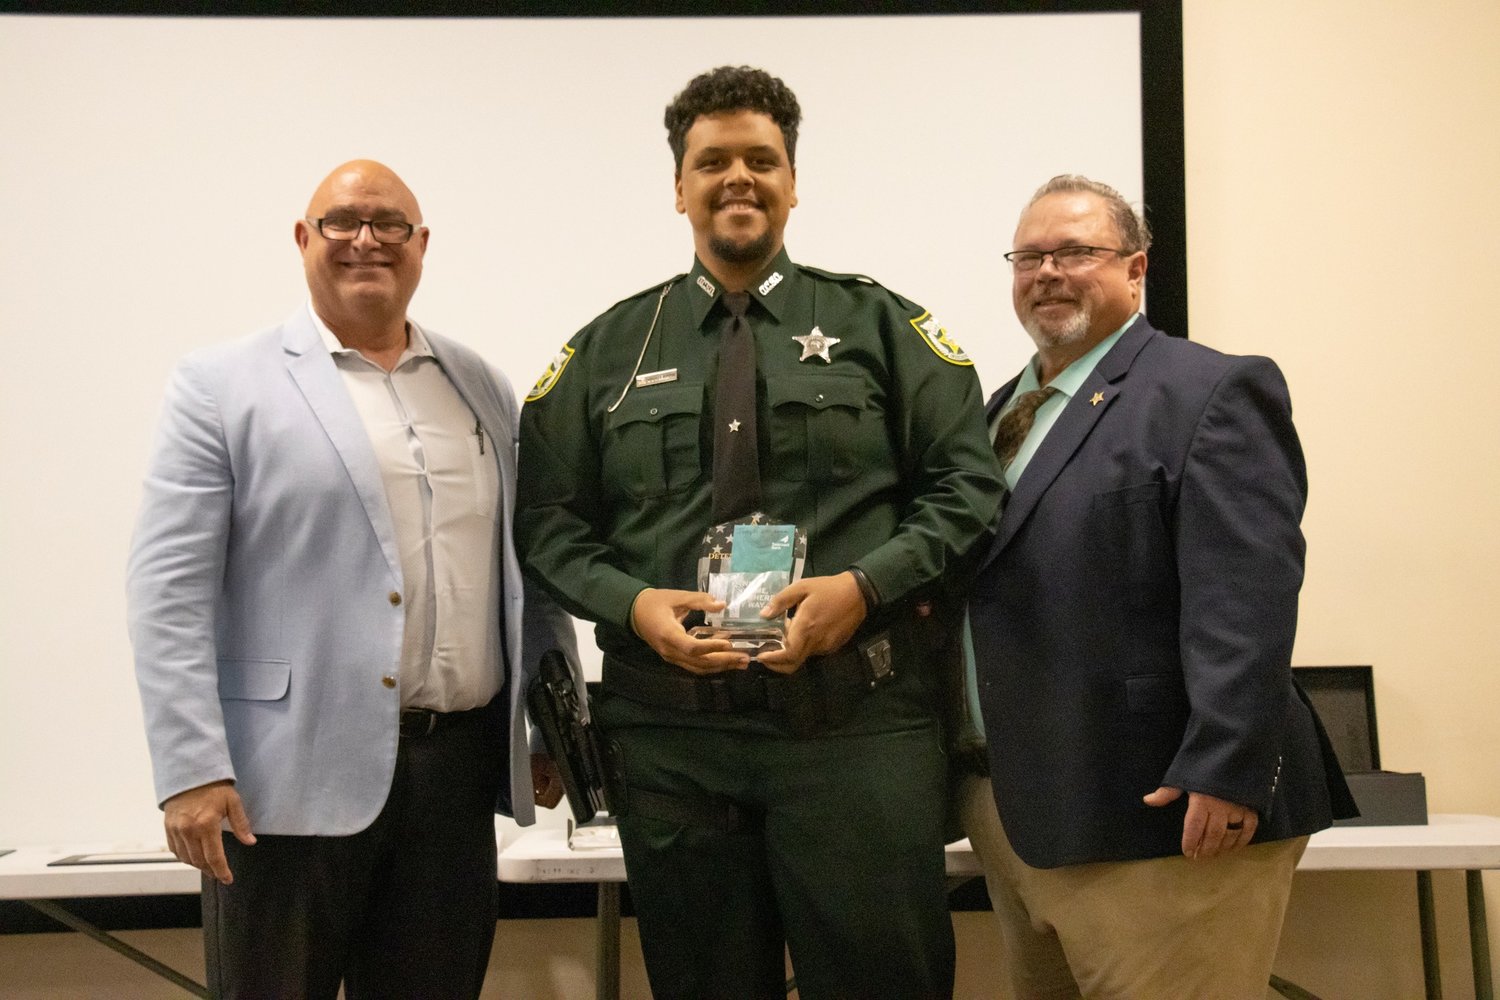 Today, we will tell you about Detention Deputy Joseph Benjamin, who was awarded our Detention Deputy of the Year Award.

Benjamin was nominated in the third quarter by one of his Command Staff members. Benjamin has an outstanding personality, is always willing to take on new tasks, always willing to learn, and to help out new Detention Deputies. Benjamin is very driven in his work, and gets along with everyone. He will be a great leader one day, and we look forward to seeing his continued success. Great Job Detention Deputy Benjamin, and Congratulations to you on your well deserved award.
Pictured left to right are Major Michael Hazellief, Deputy Benjamin and Sheriff Noel E. Stephen.